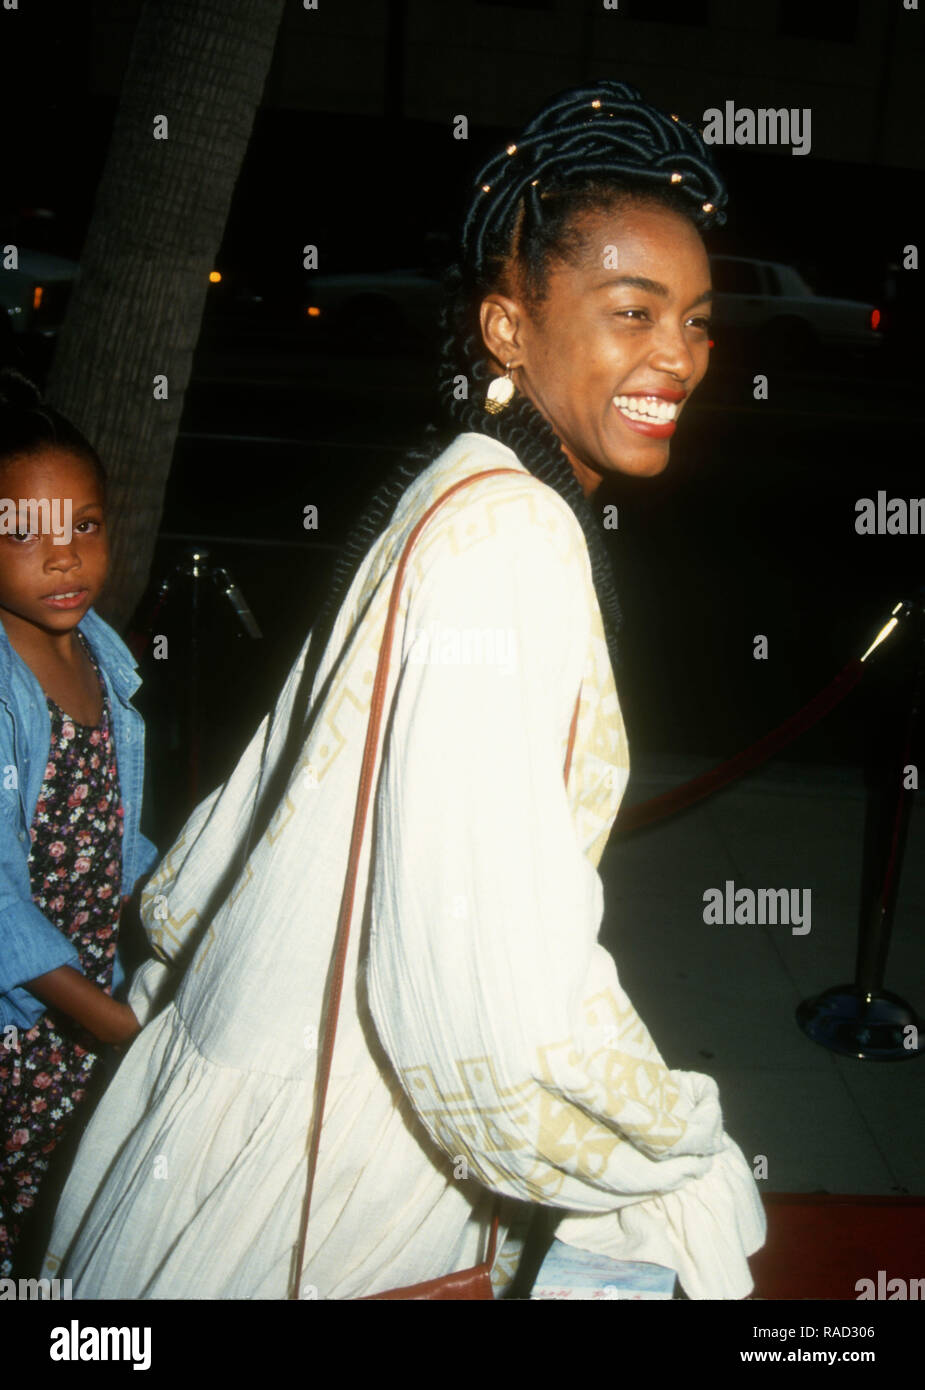 BEVERLY HILLS, CA - JULY 21: Actress Angela Bassett attends Columbia Pictures' 'Poetic Justice' Premiere on July 21, 1993 at the Samuel Goldwyn Theatre in Beverly Hills, California. Photo by Barry King/Alamy Stock Photo Stock Photo